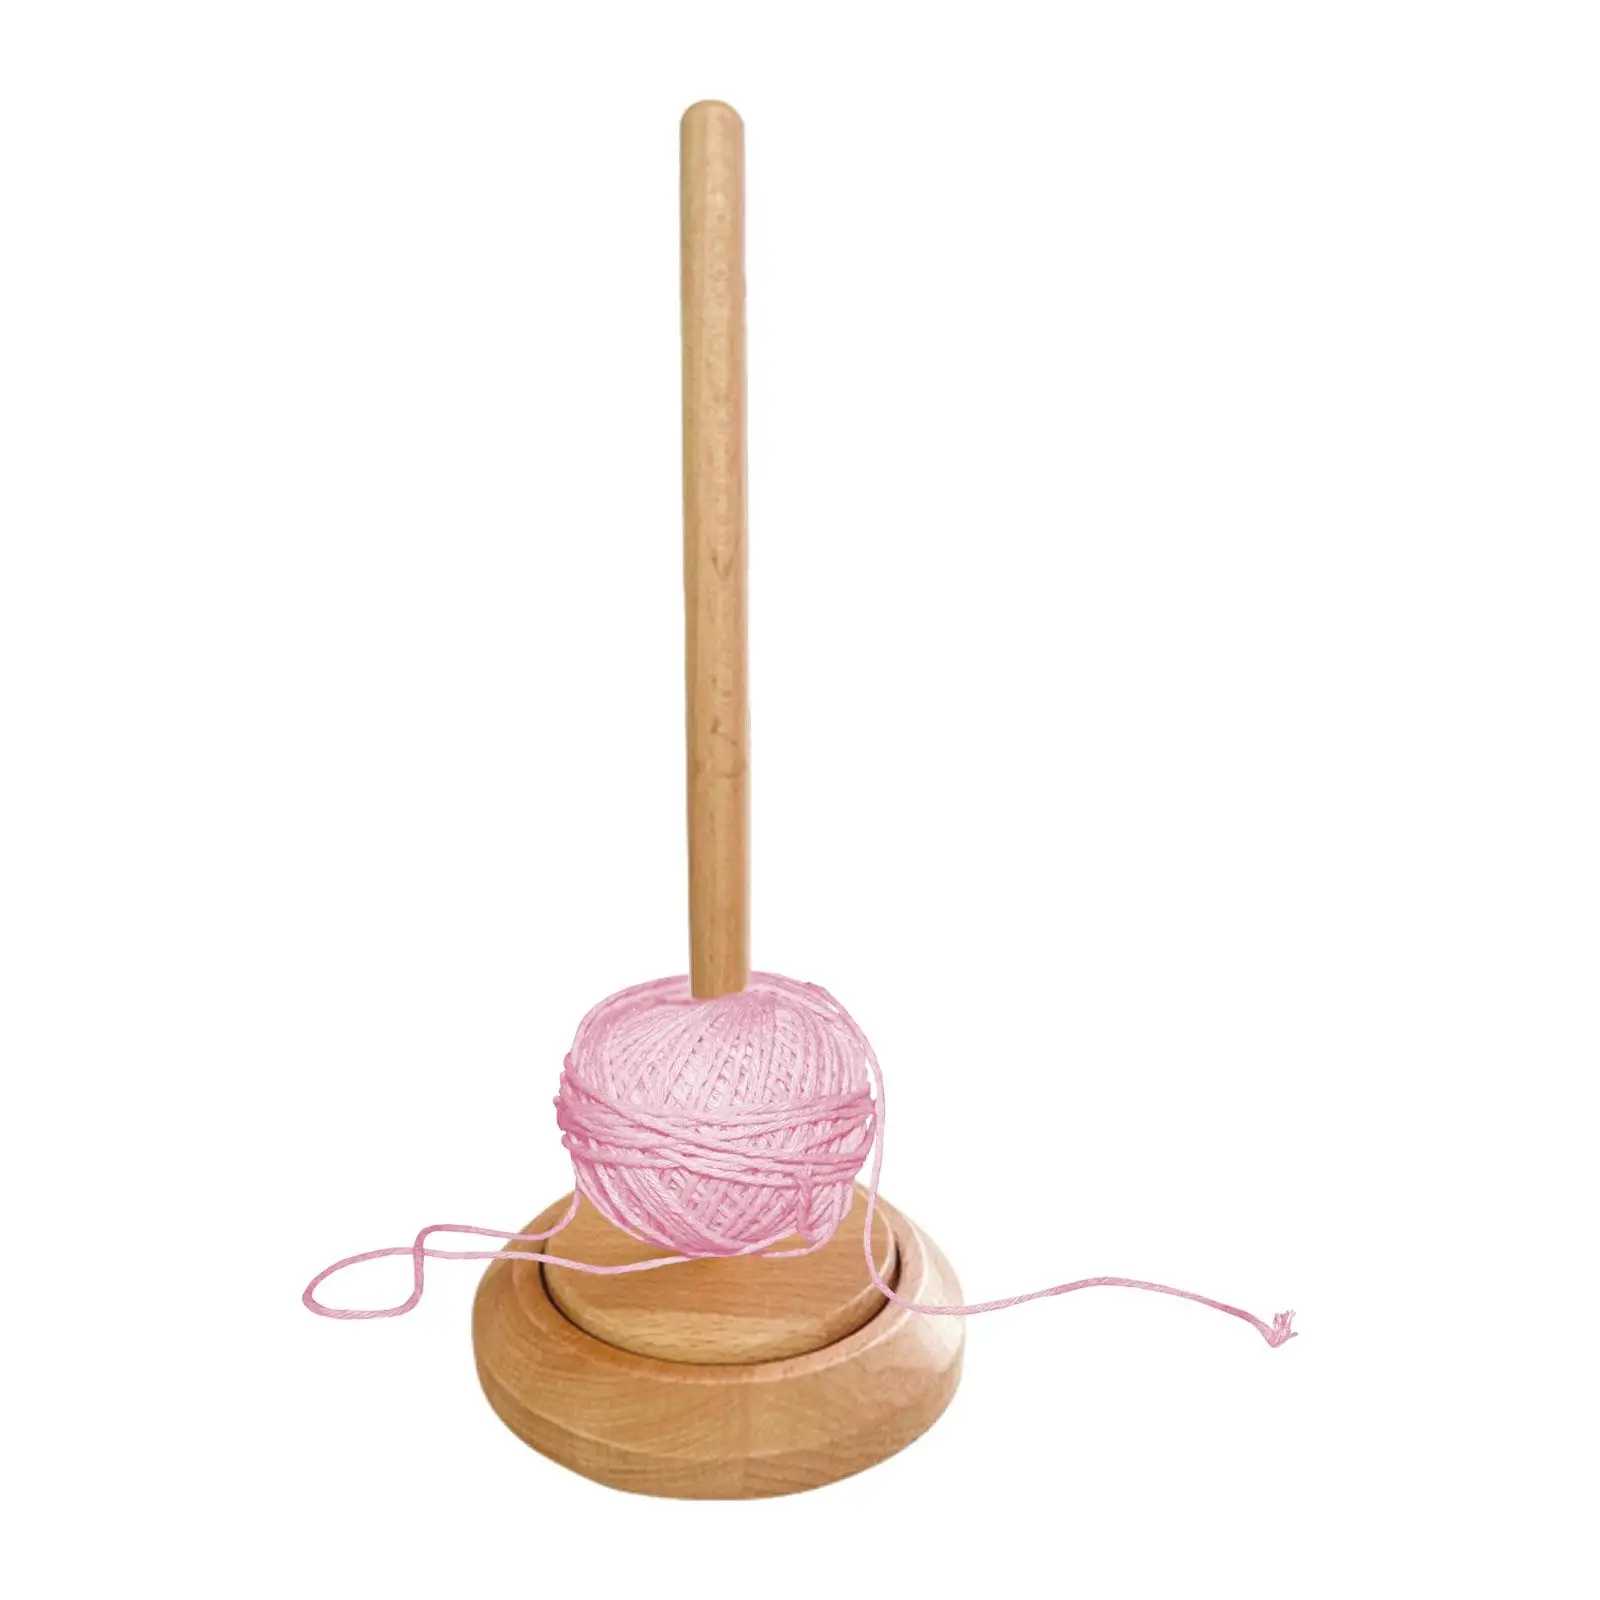 Solid Wood Yarn Ball Holder Gift Handmade Wooden Crochet Accessory Rotatable Wool String Dispenser for Mother Wife Sister